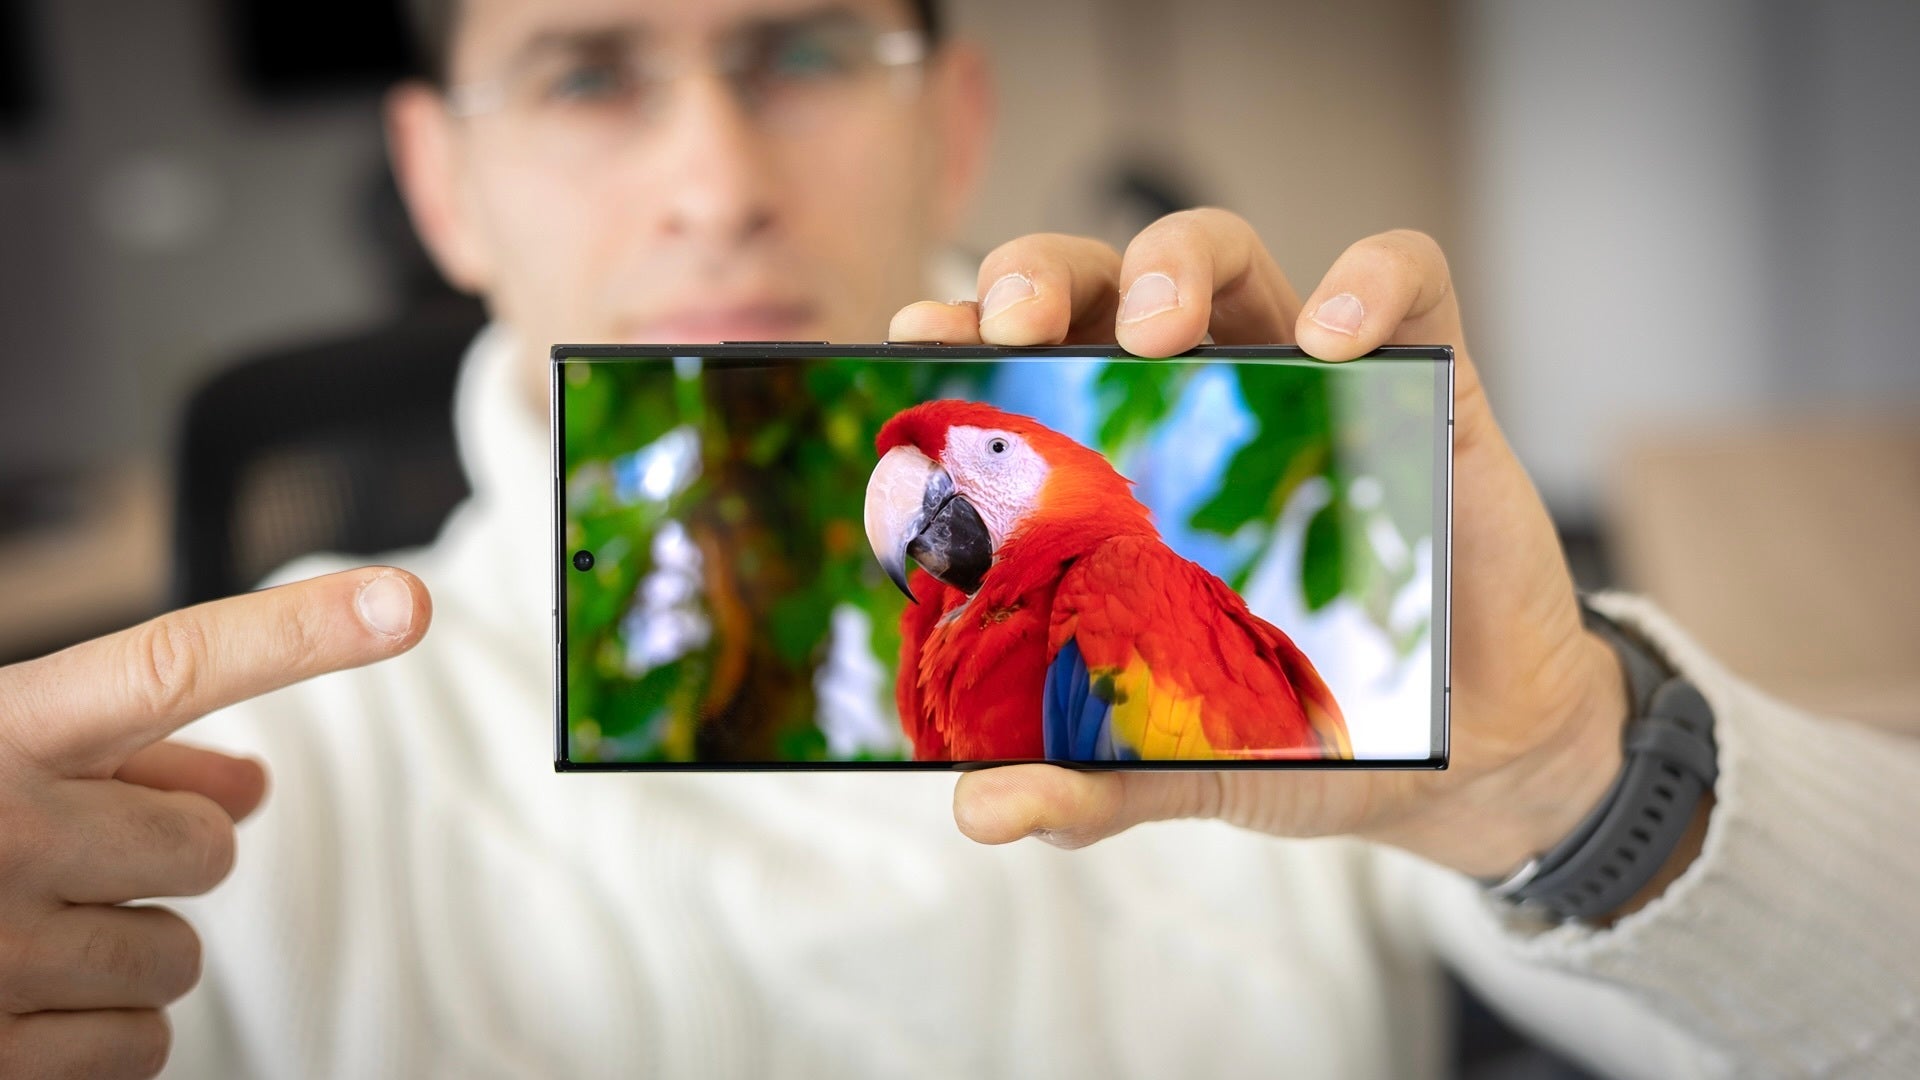 From the first Galaxy Fold to the Galaxy S23 Ultra : 5 reasons Samsung is worth loving